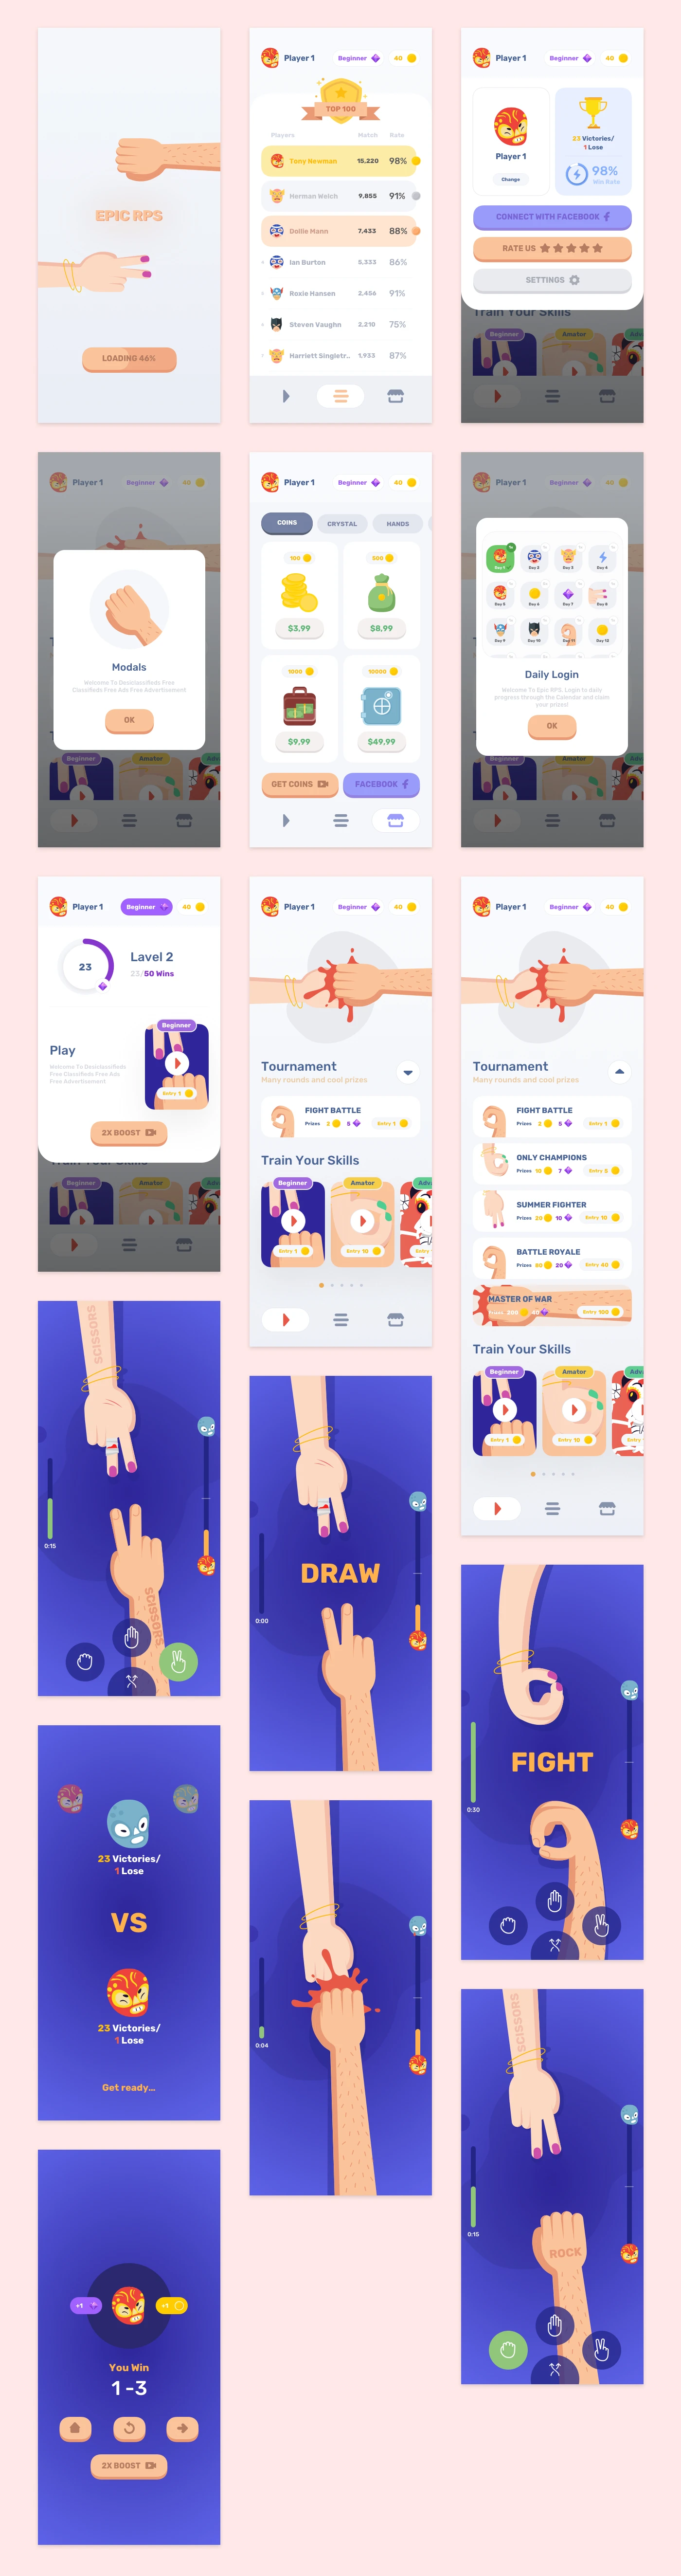 Epic Mobile Game UI Kit for Sketch - Fancy mobile game concept, 16+ screens for you to get started.